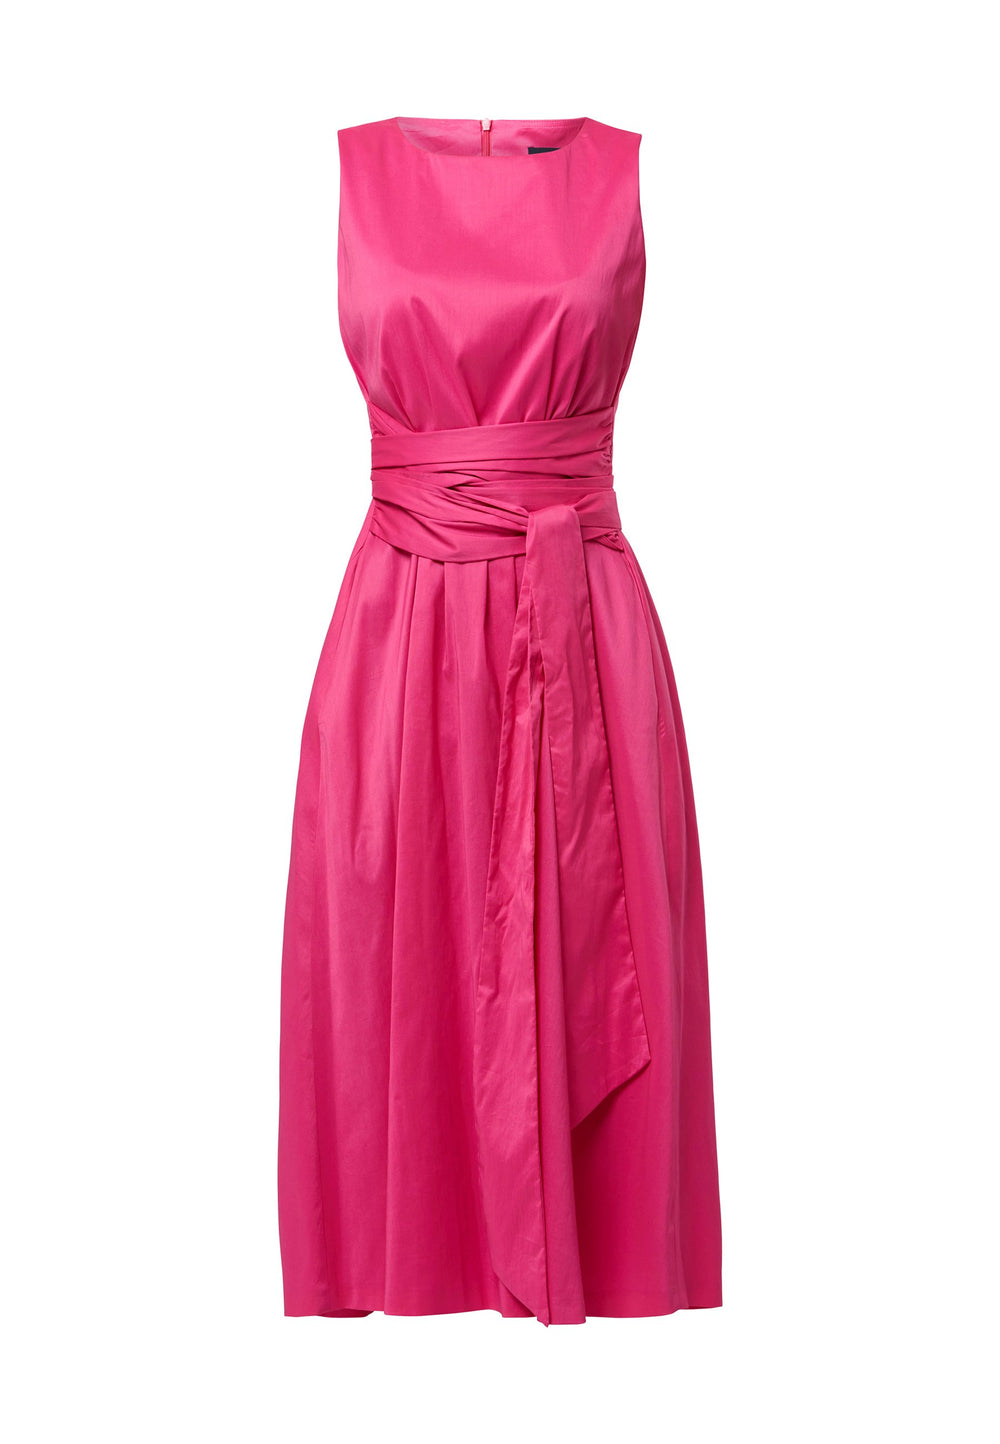 Our best-selling Avril dress returns in bright pink. Elevate your summer look with an easy-fitting dress. A sleeveless silhouette featuring a defined waist and an oversized wrap tie. The flared skirt falls to the mid-calf with side seam pockets.